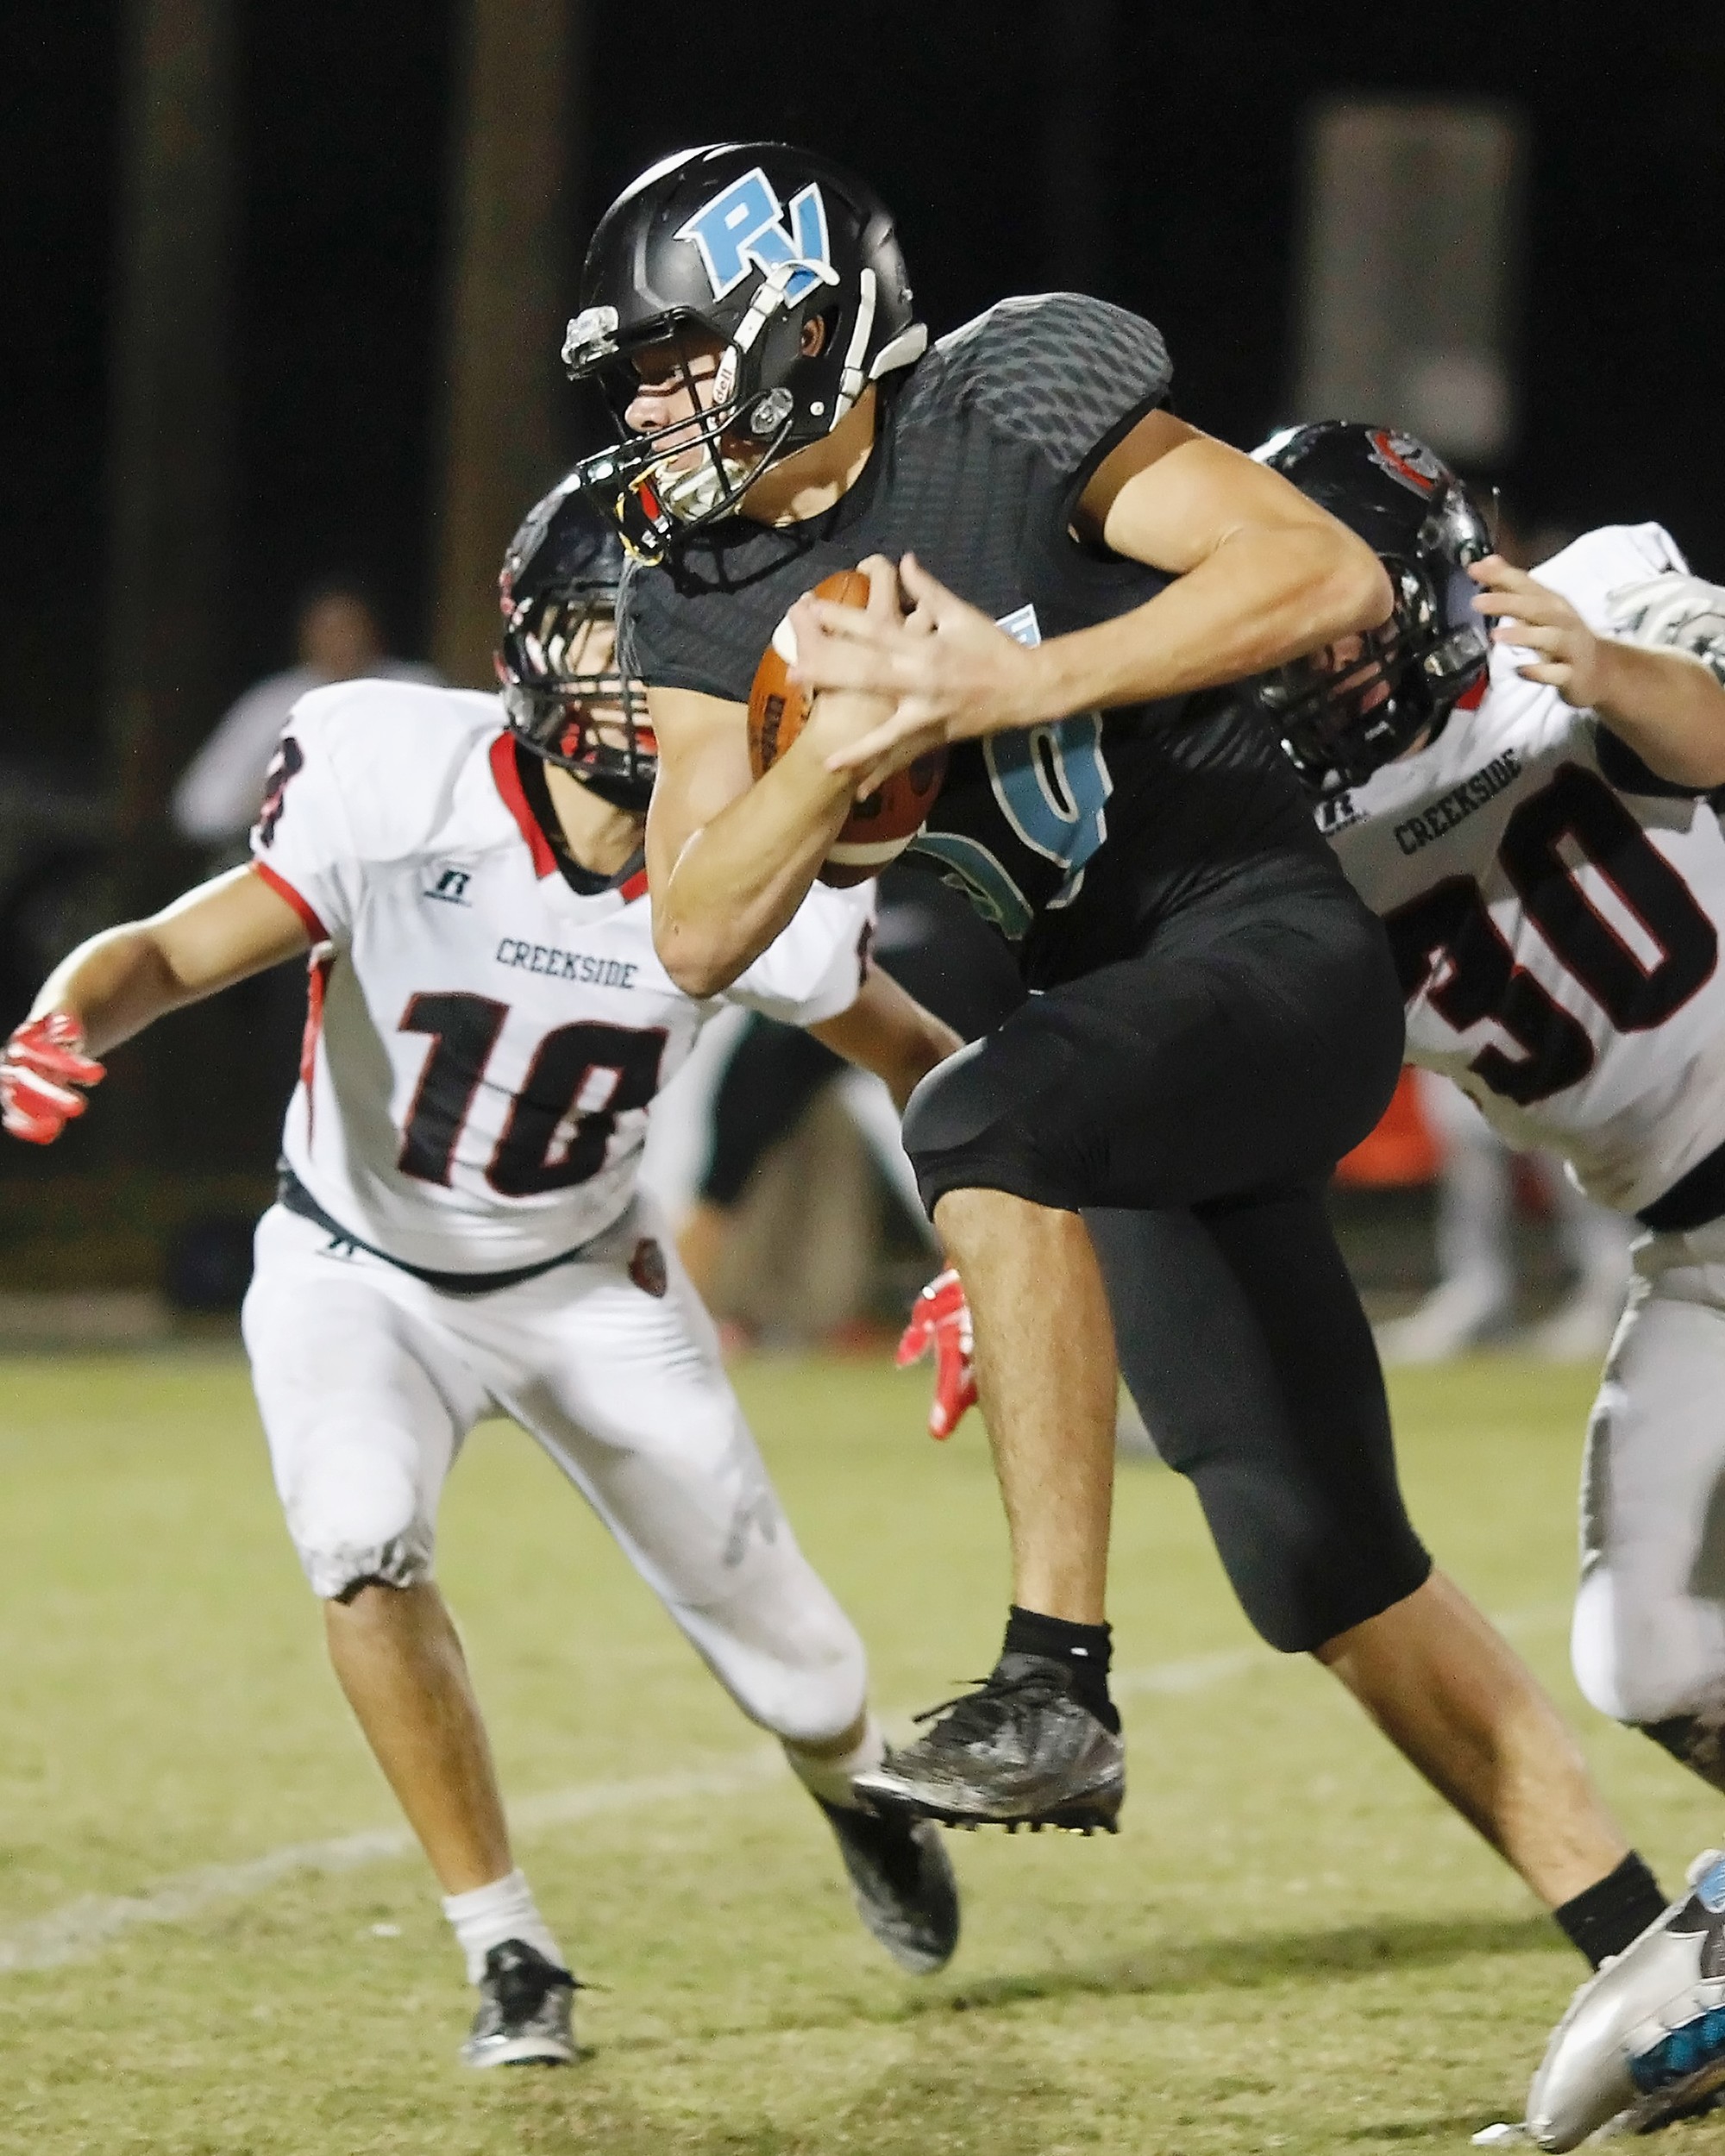 #39 Zach King high steps for a good gain for Ponte Vedra.